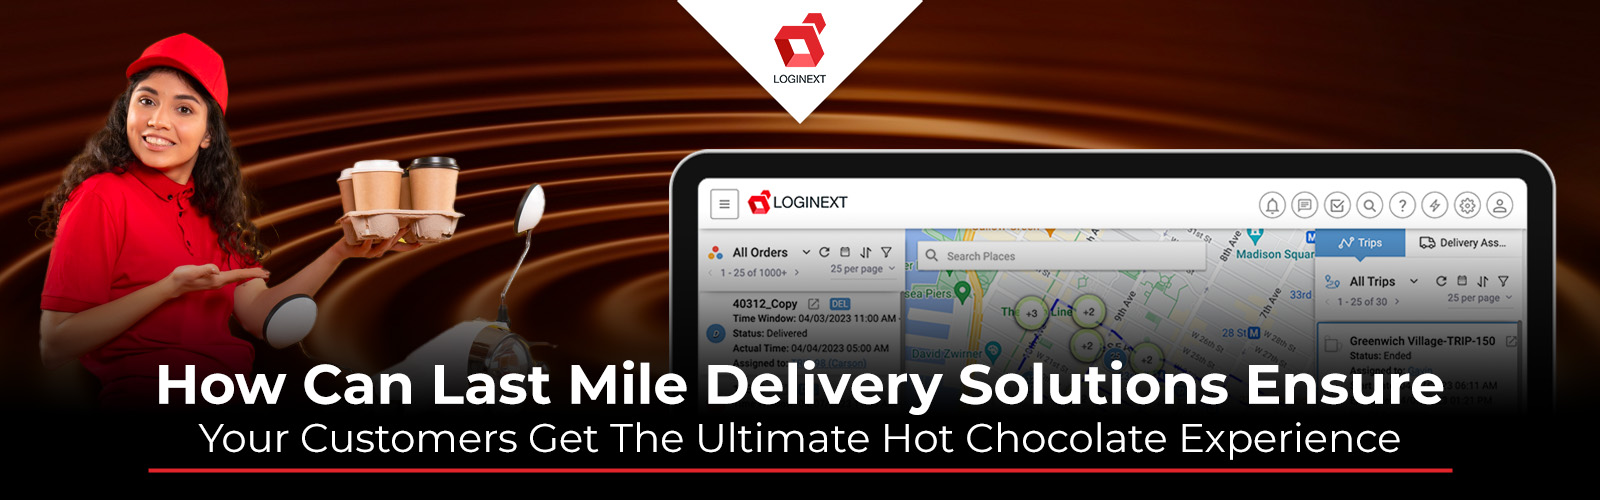 Last Mile Delivery Solution Ensuring Timely Delivery of Hot Chocolate